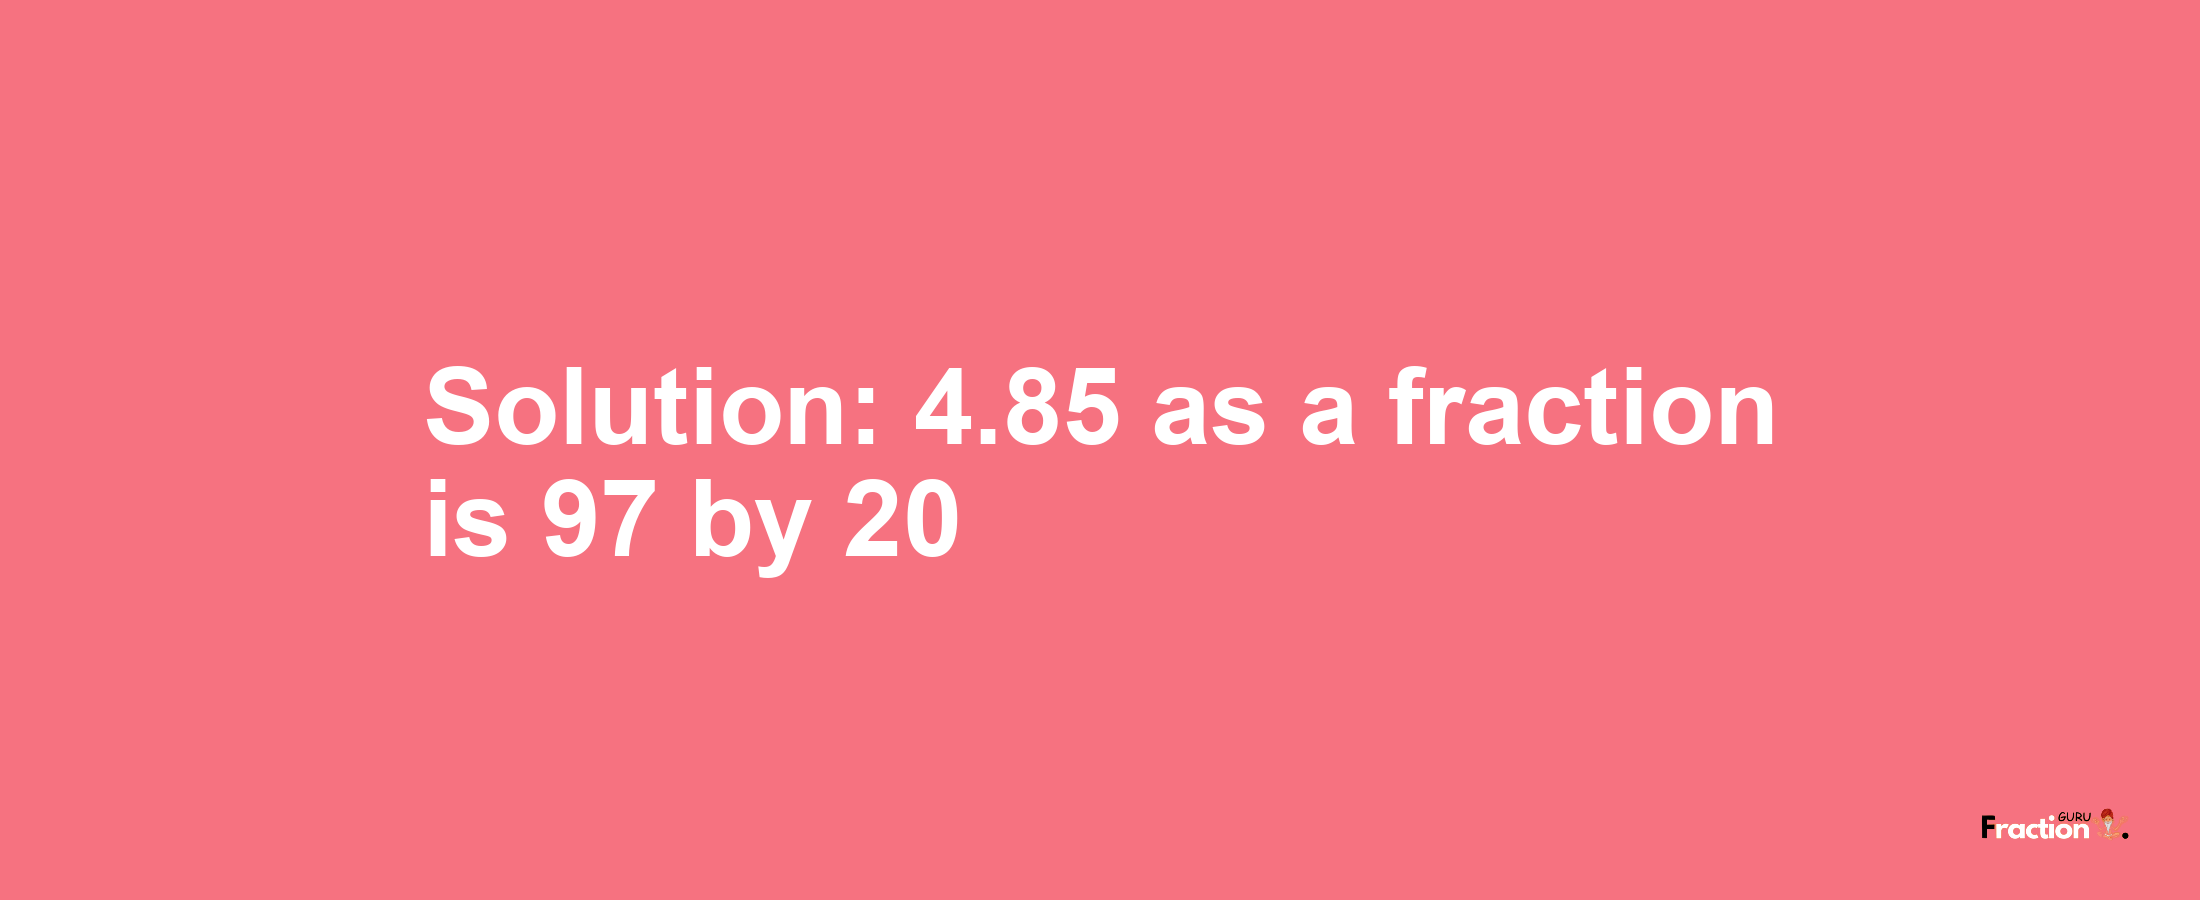 Solution:4.85 as a fraction is 97/20